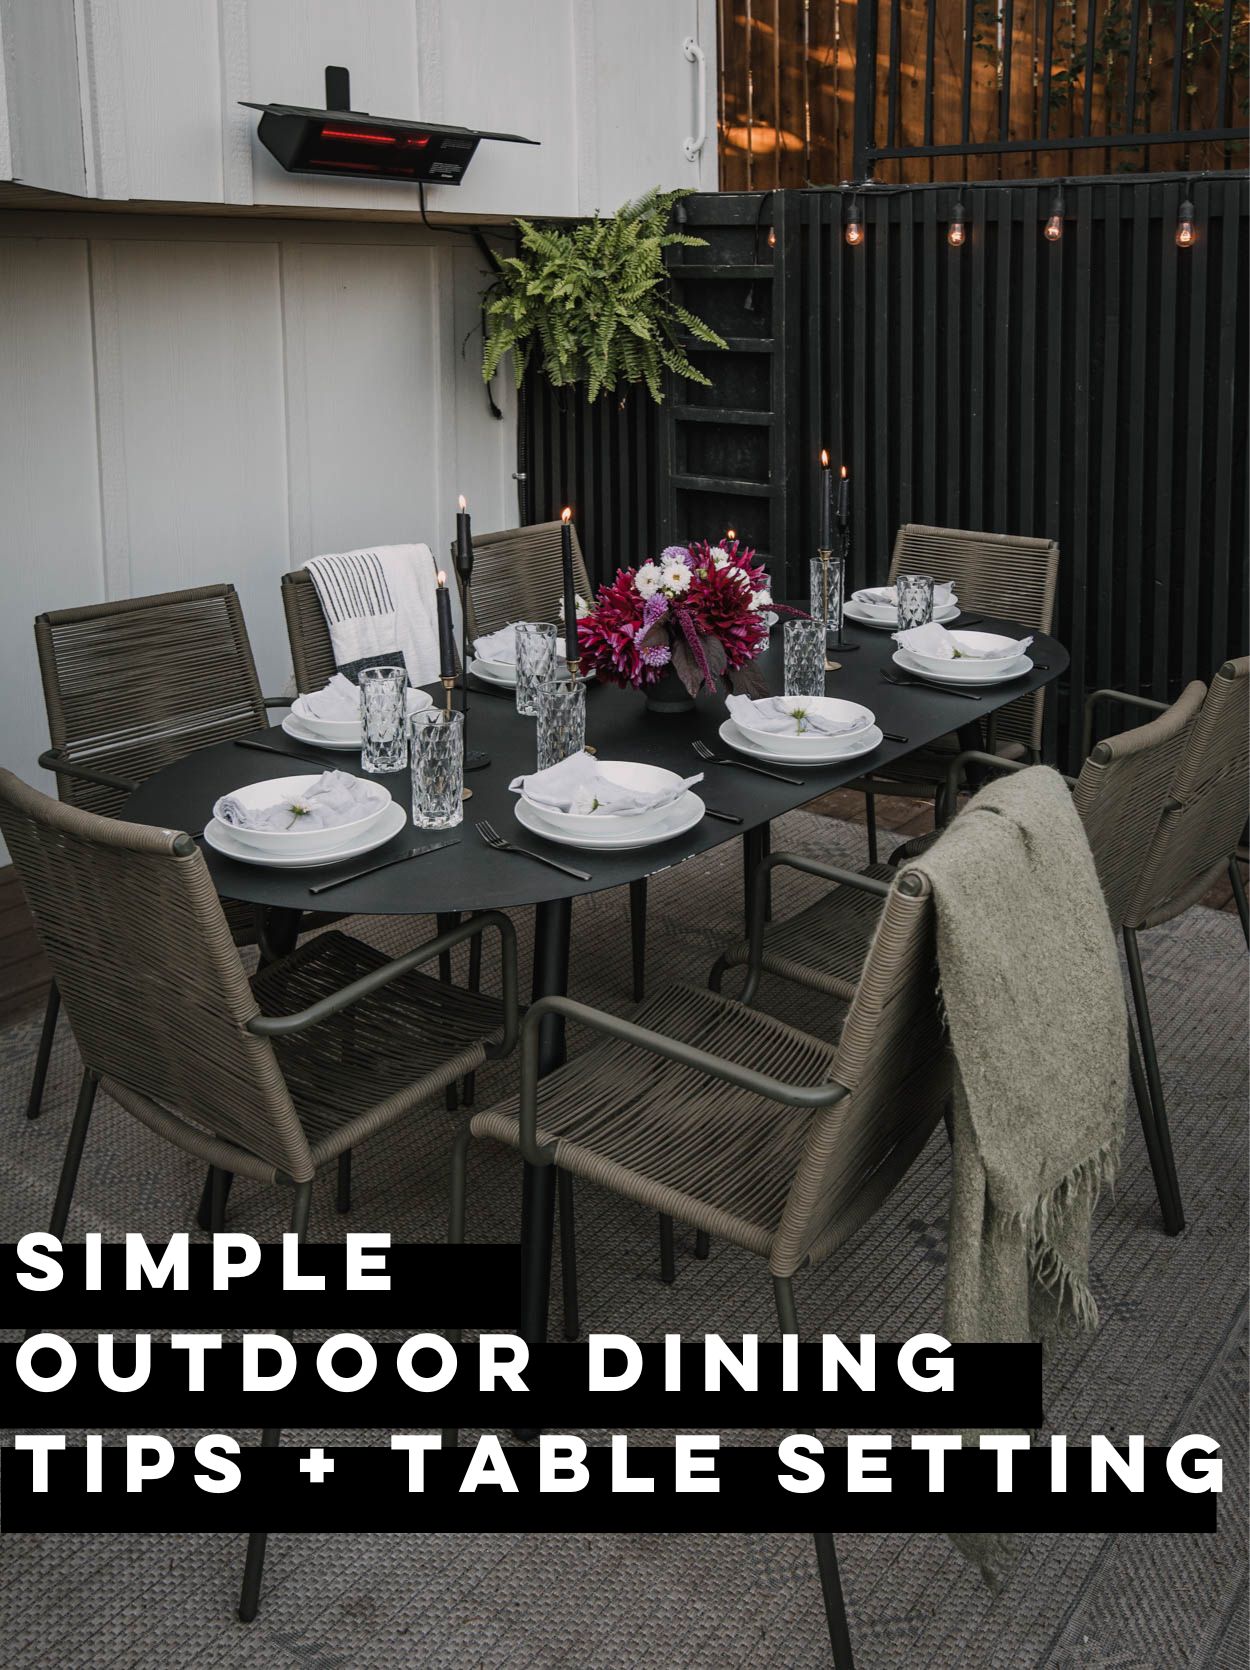 Simple outdoor dining tips and table setting (text over image)